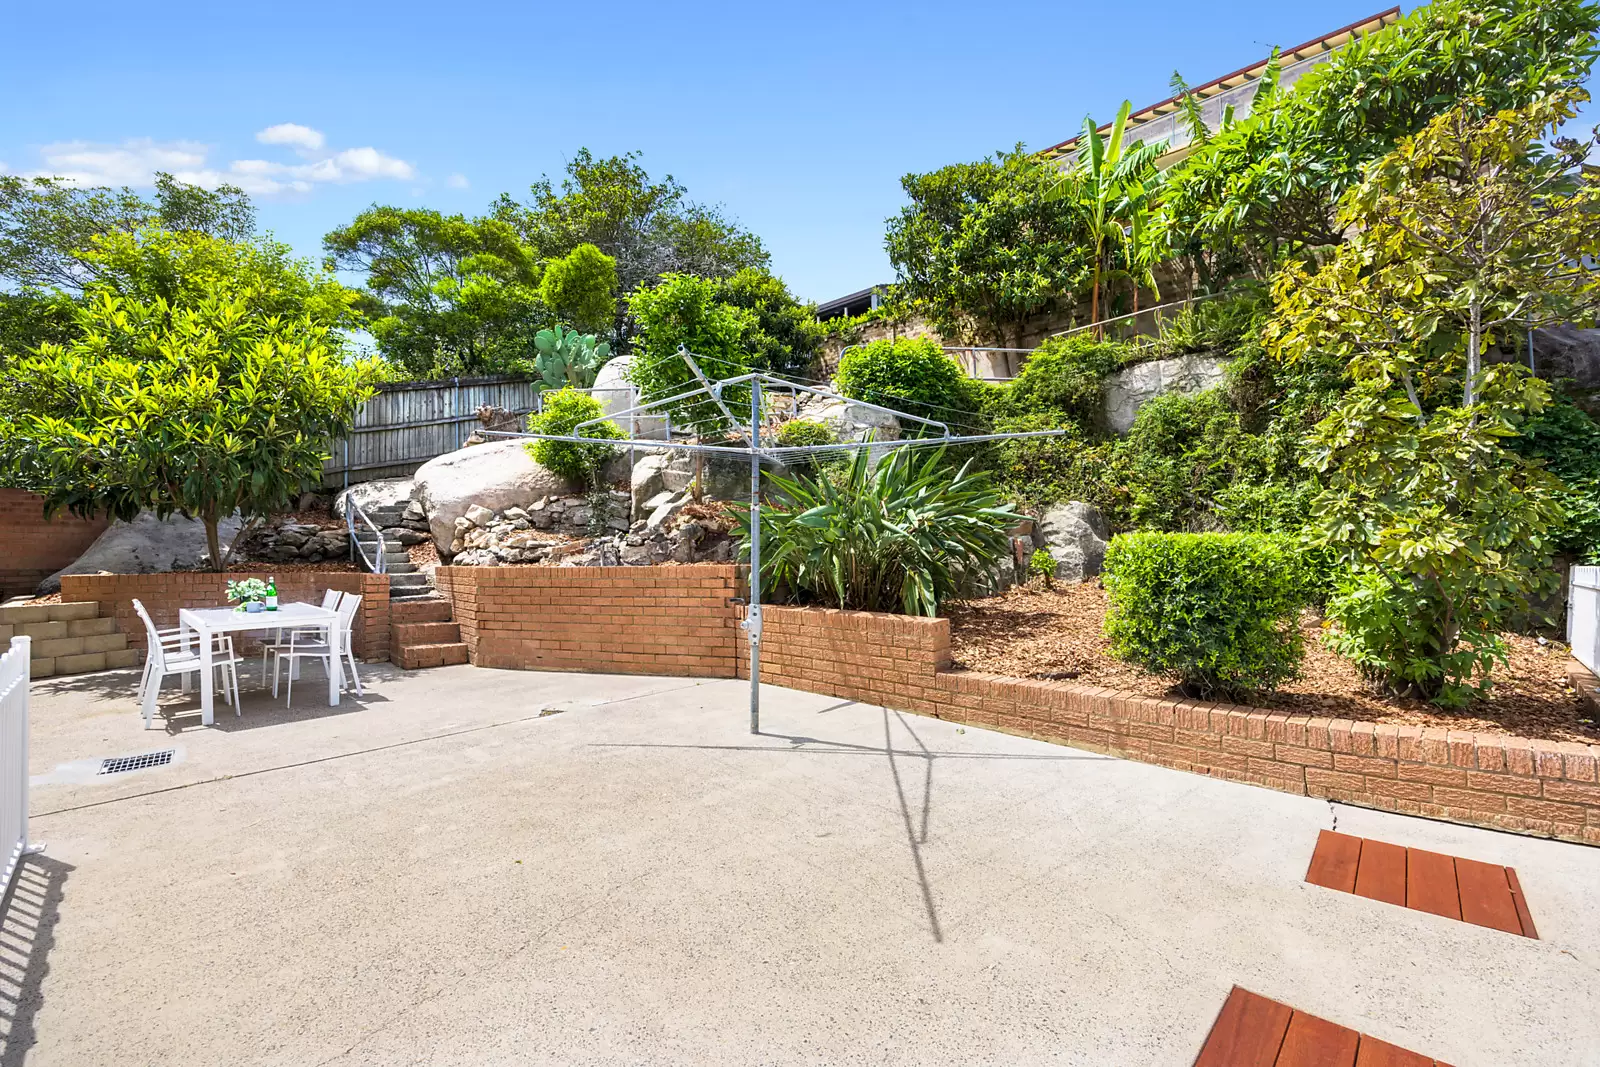 Photo #6: 113 Moverly Road, South Coogee - Auction by Sydney Sotheby's International Realty